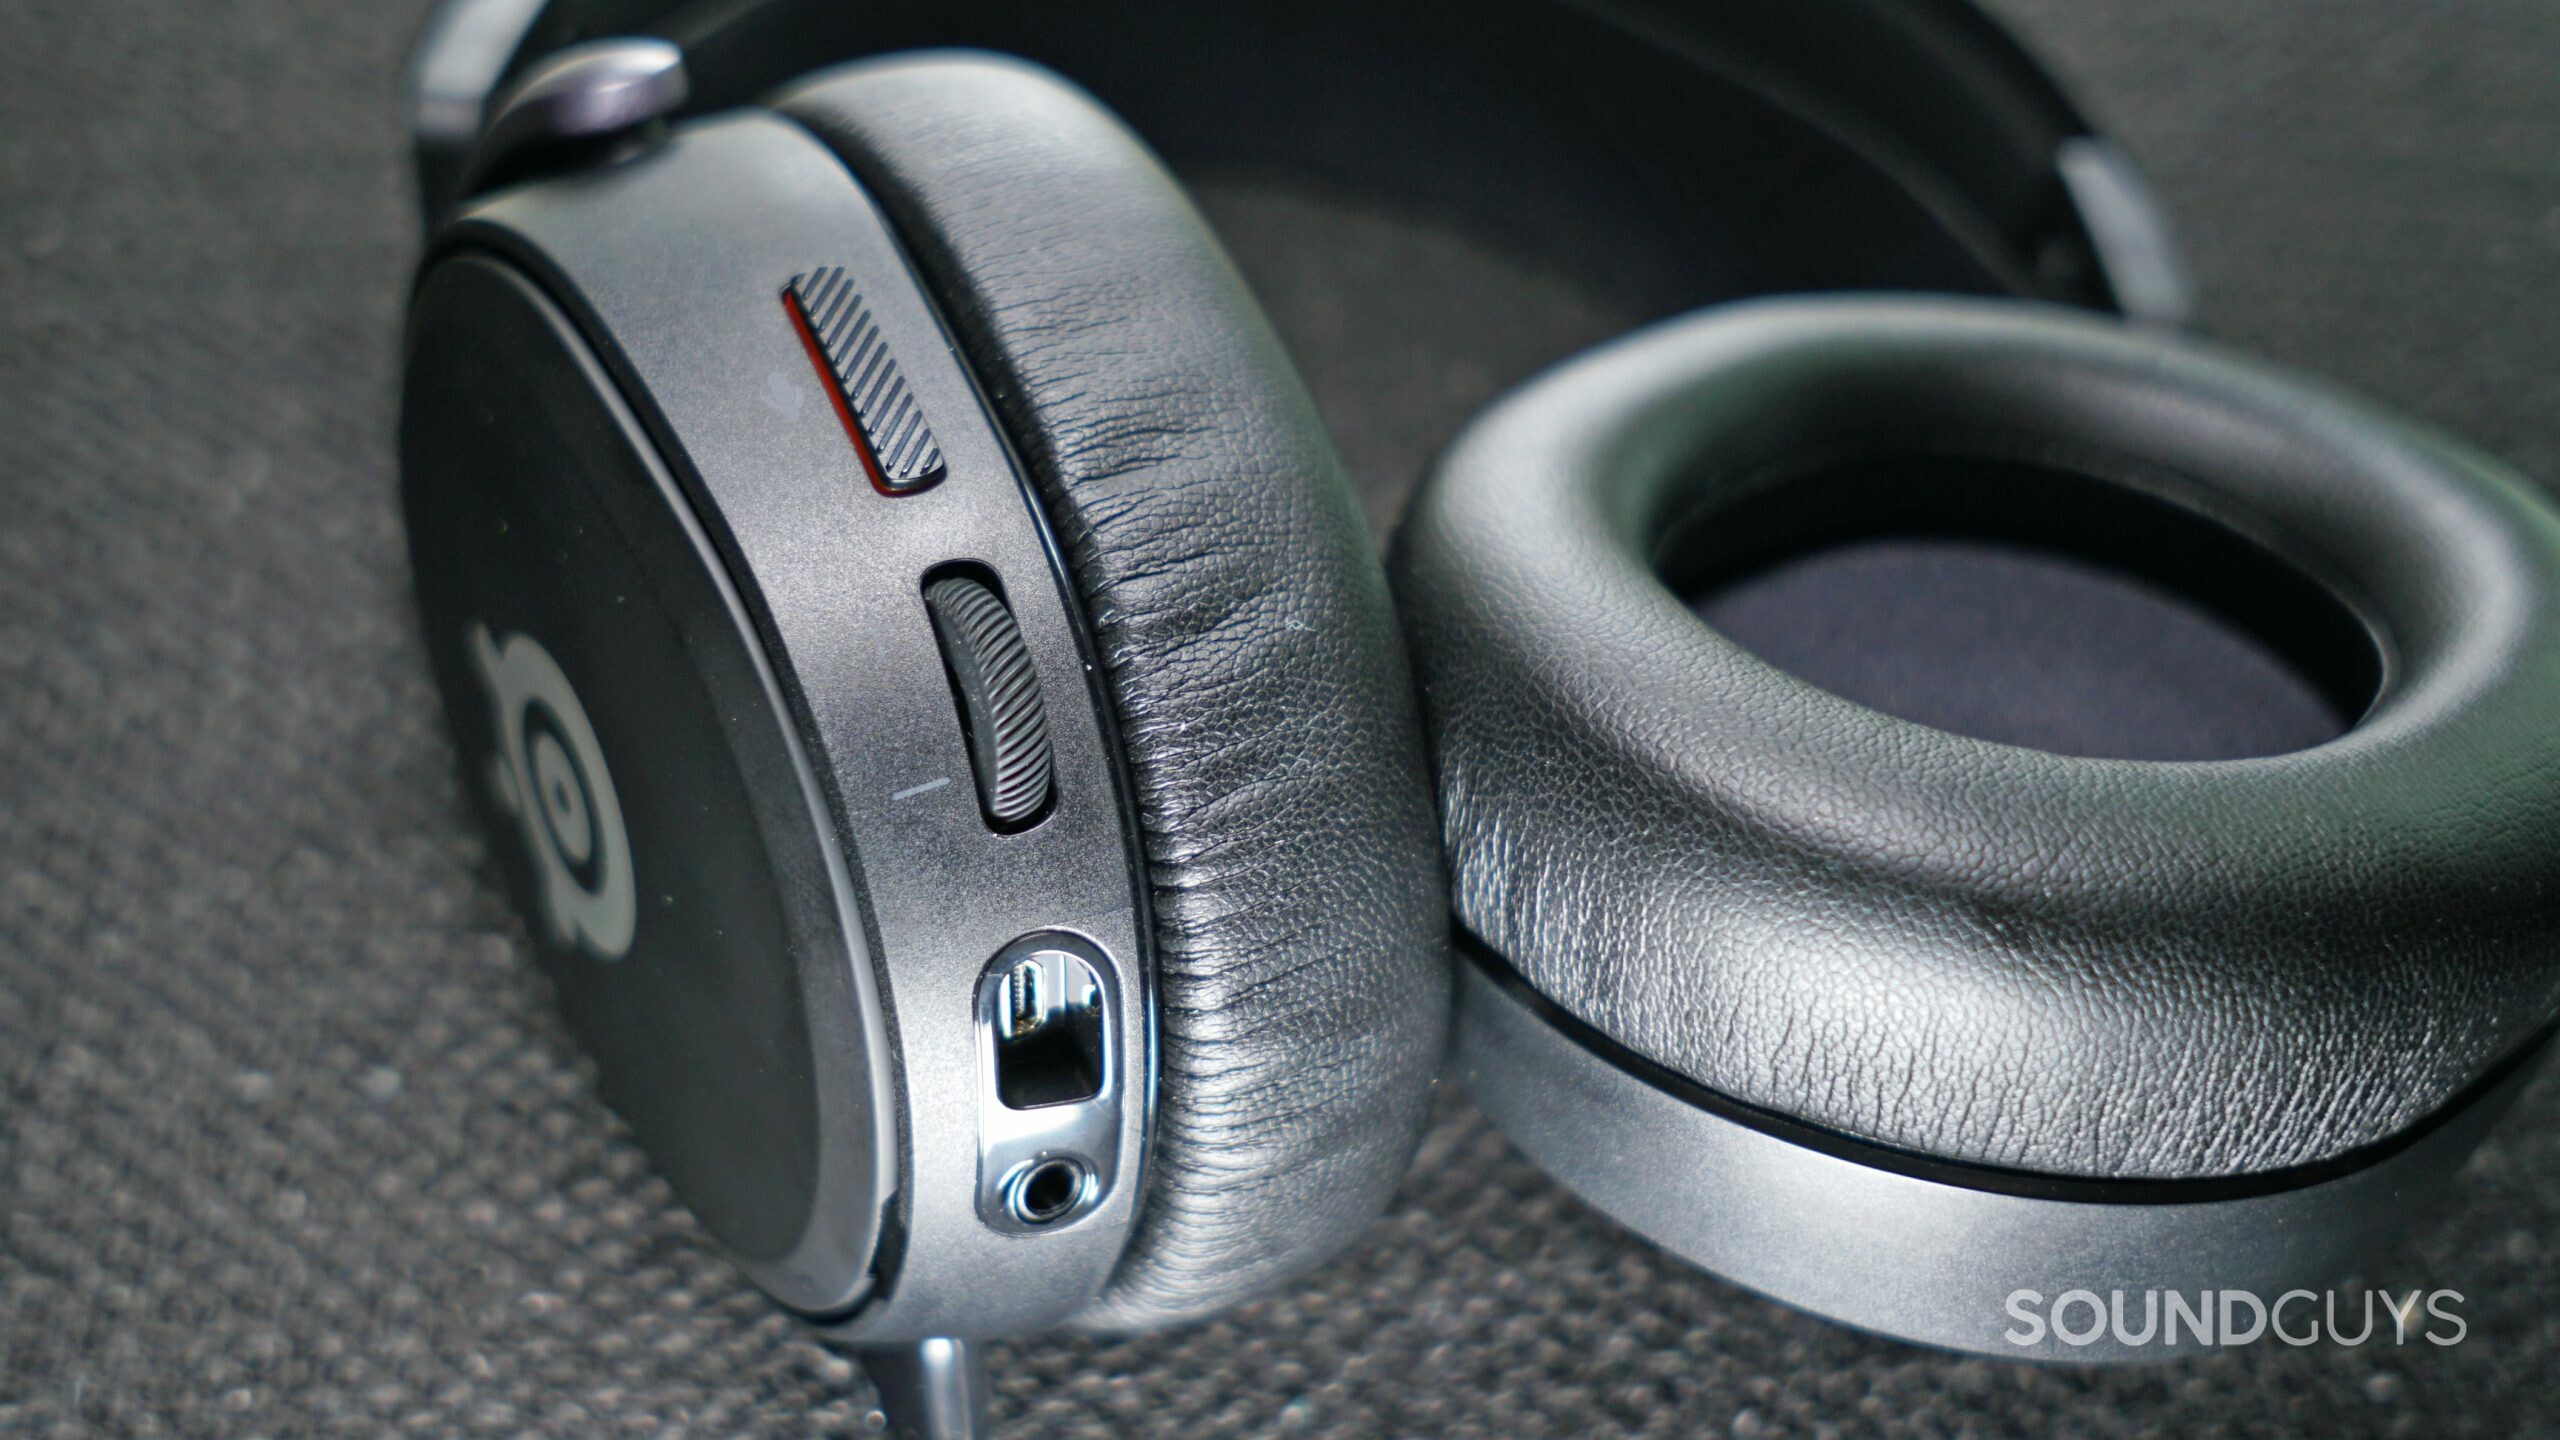 The SteelSeries Arctis Prime lays on a fabric surface with its on-ear controls in view.